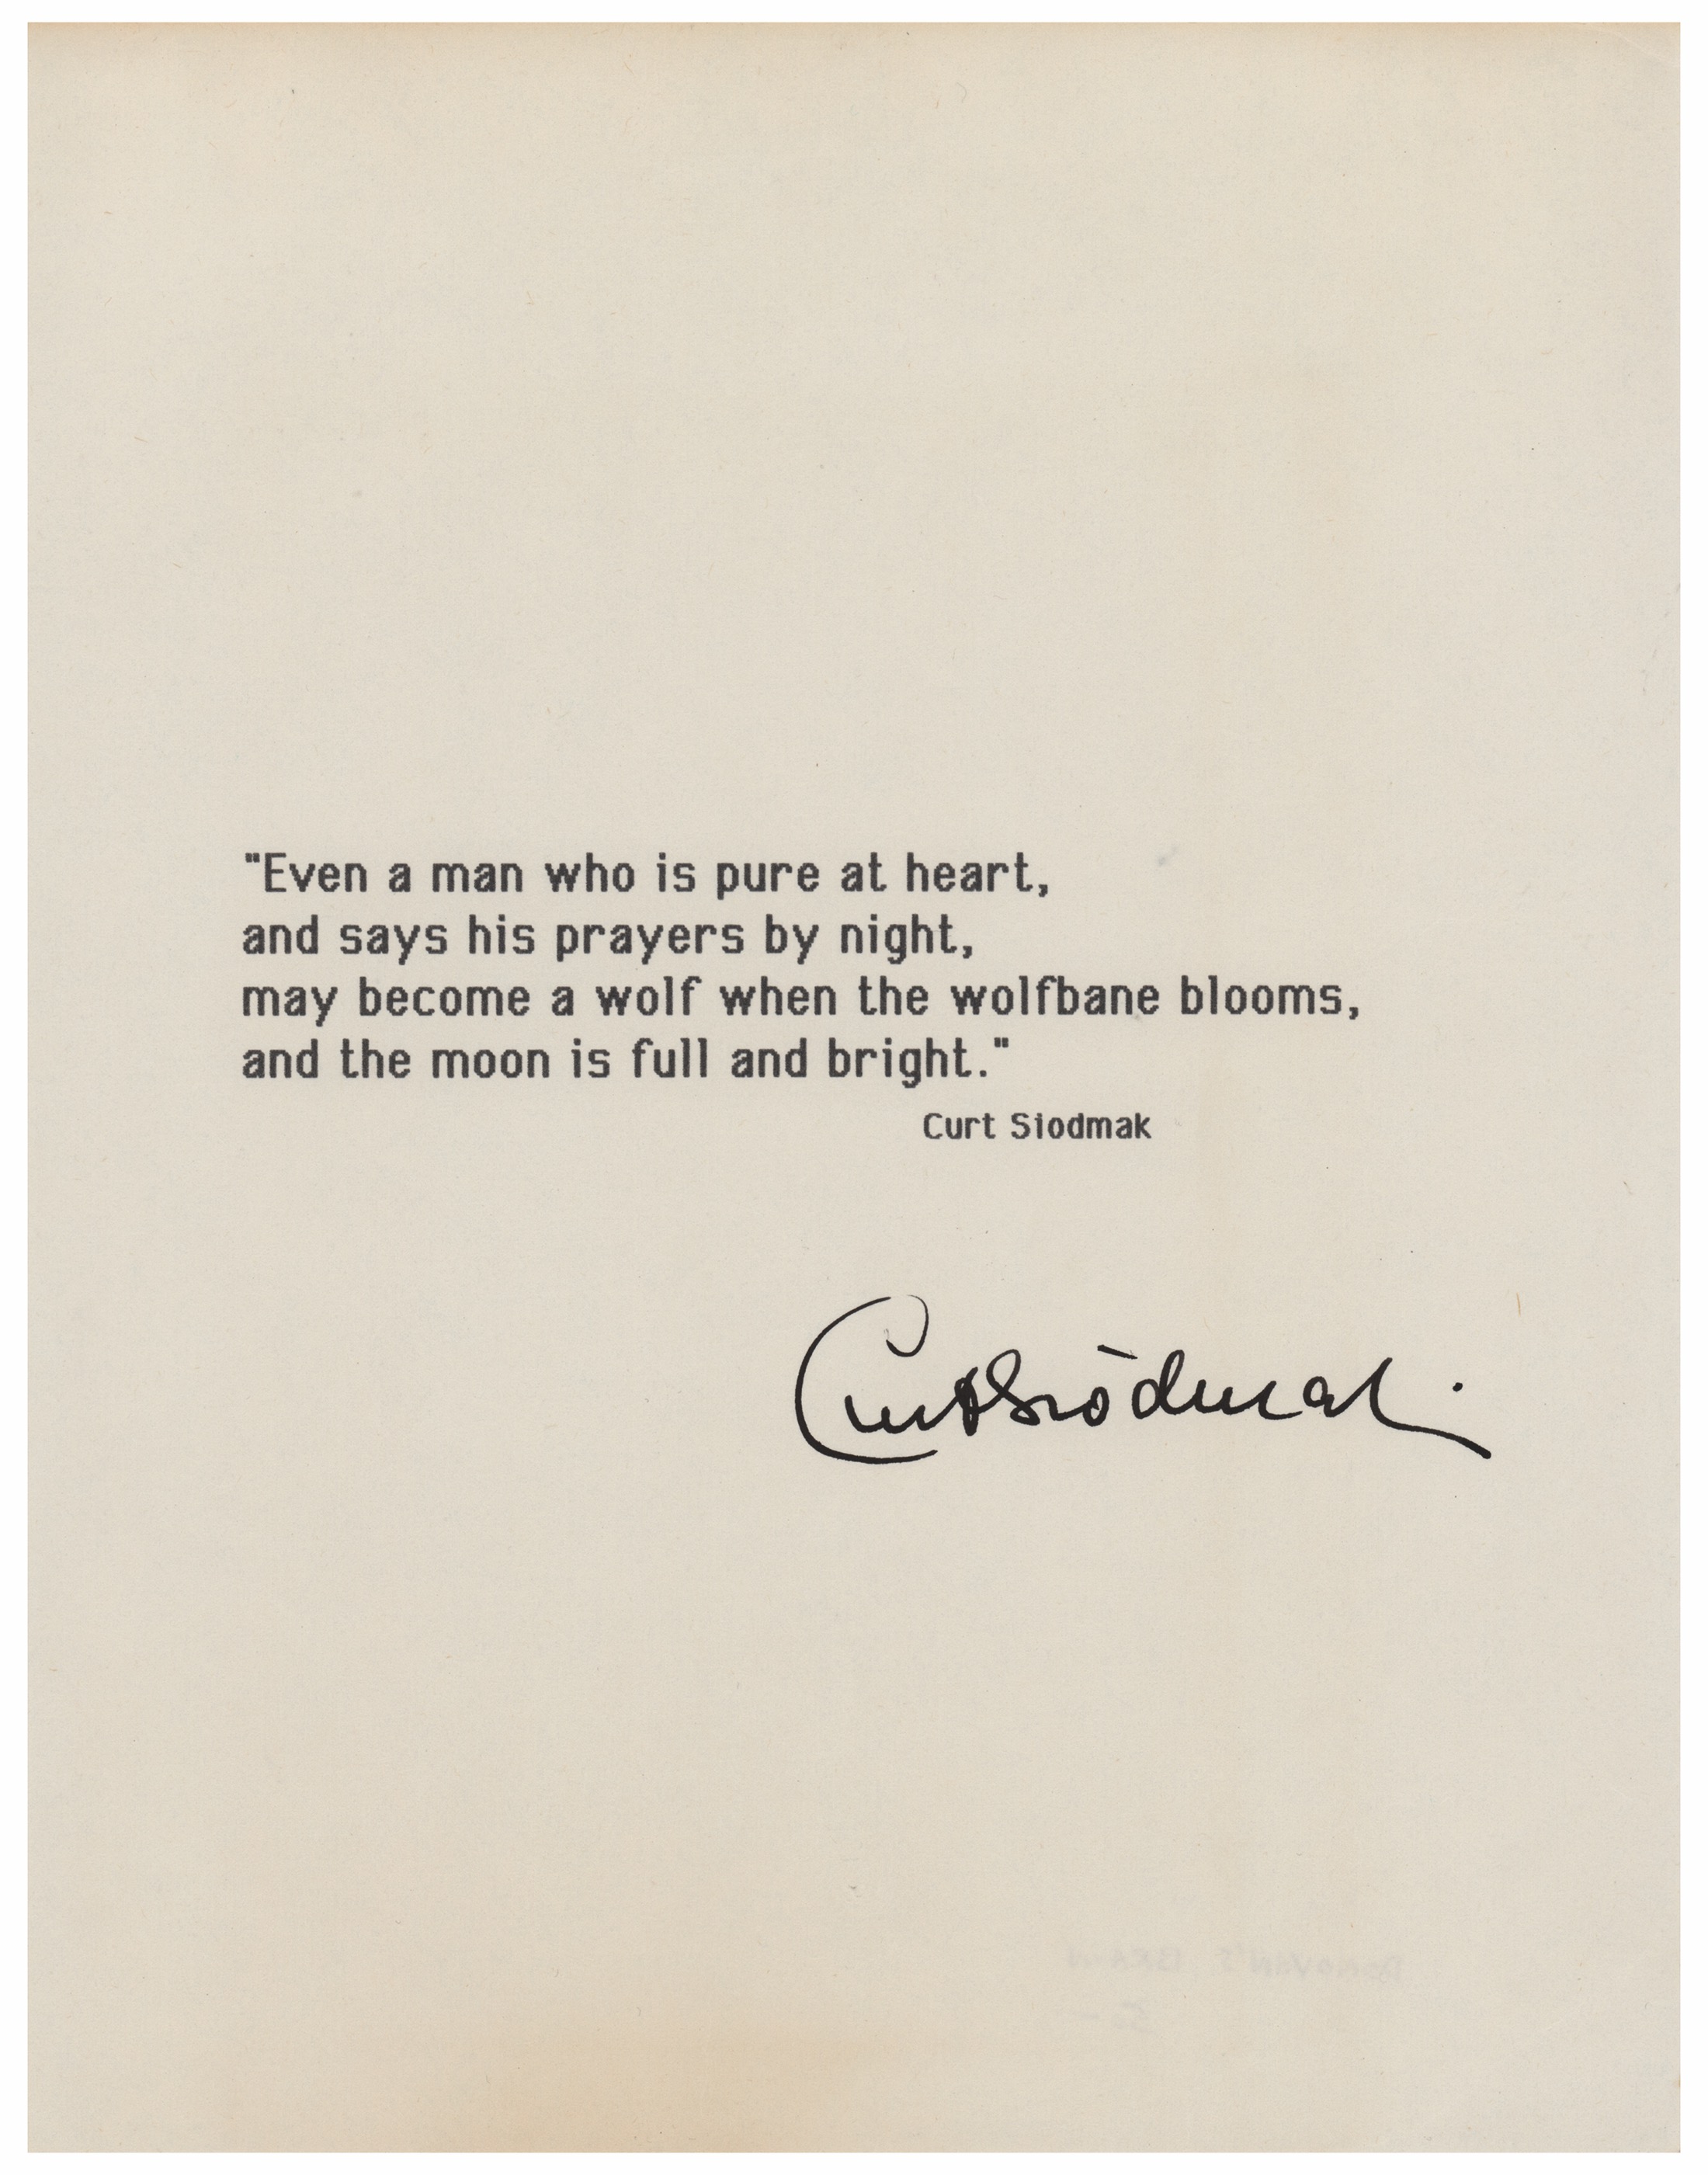 Lot #732 Curt Siodmak Typed Quotation Signed - Image 1